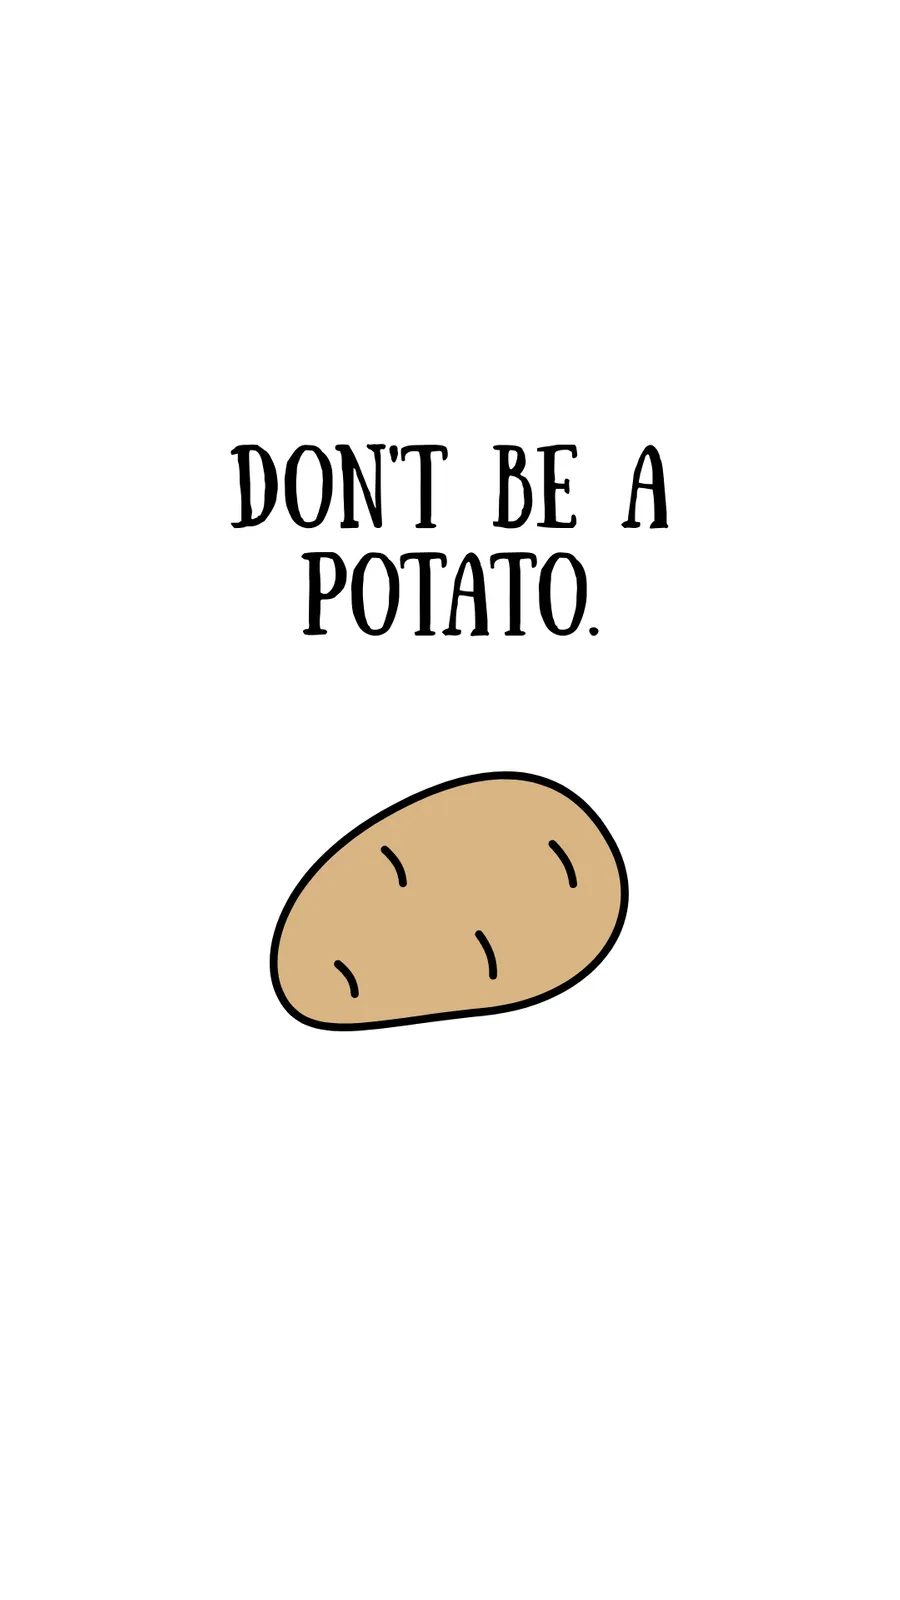 Don't be a potato zoom-backgrounds template